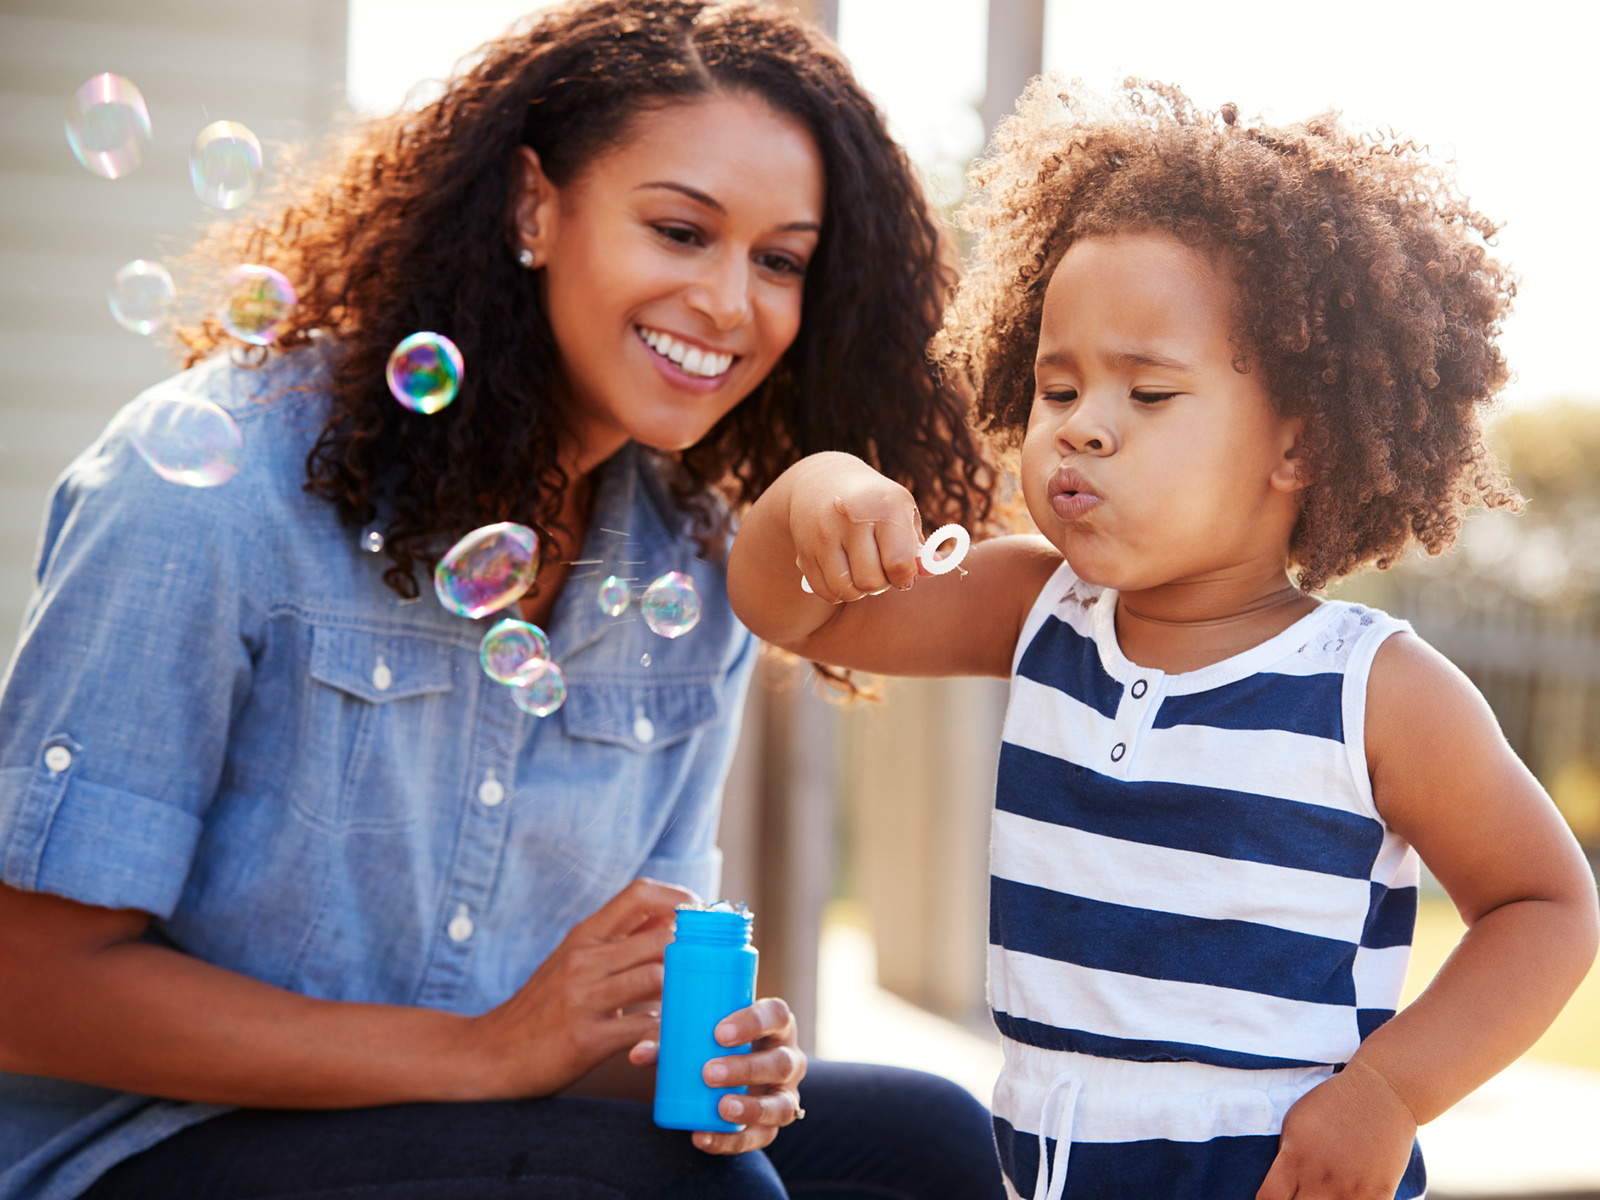 Young child blows bubbles outside while mother looks on